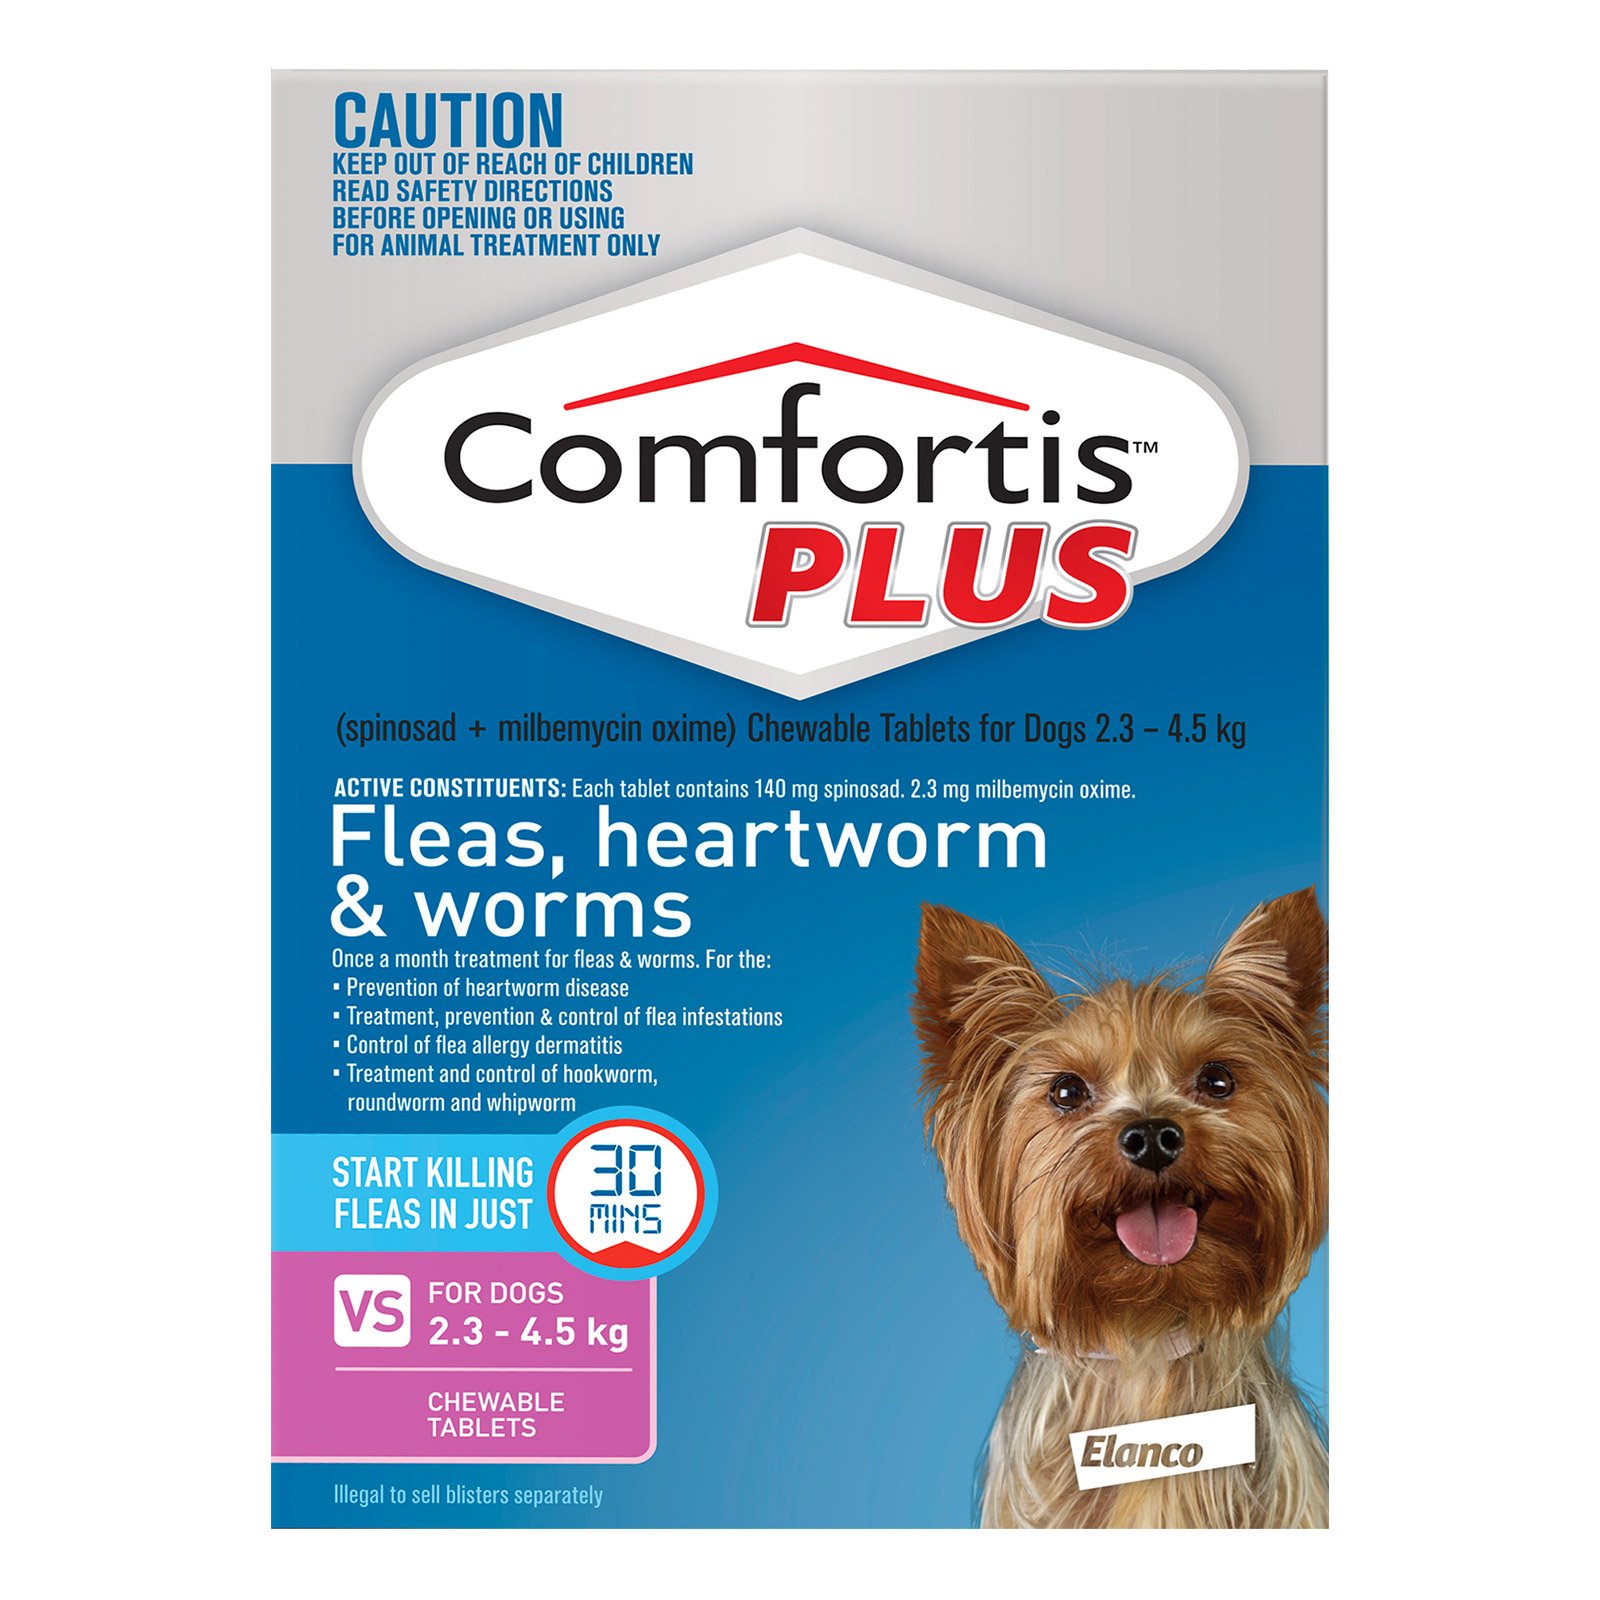 Comfortis Plus for XSmall Dogs 2.3-4.5kg (Pink)